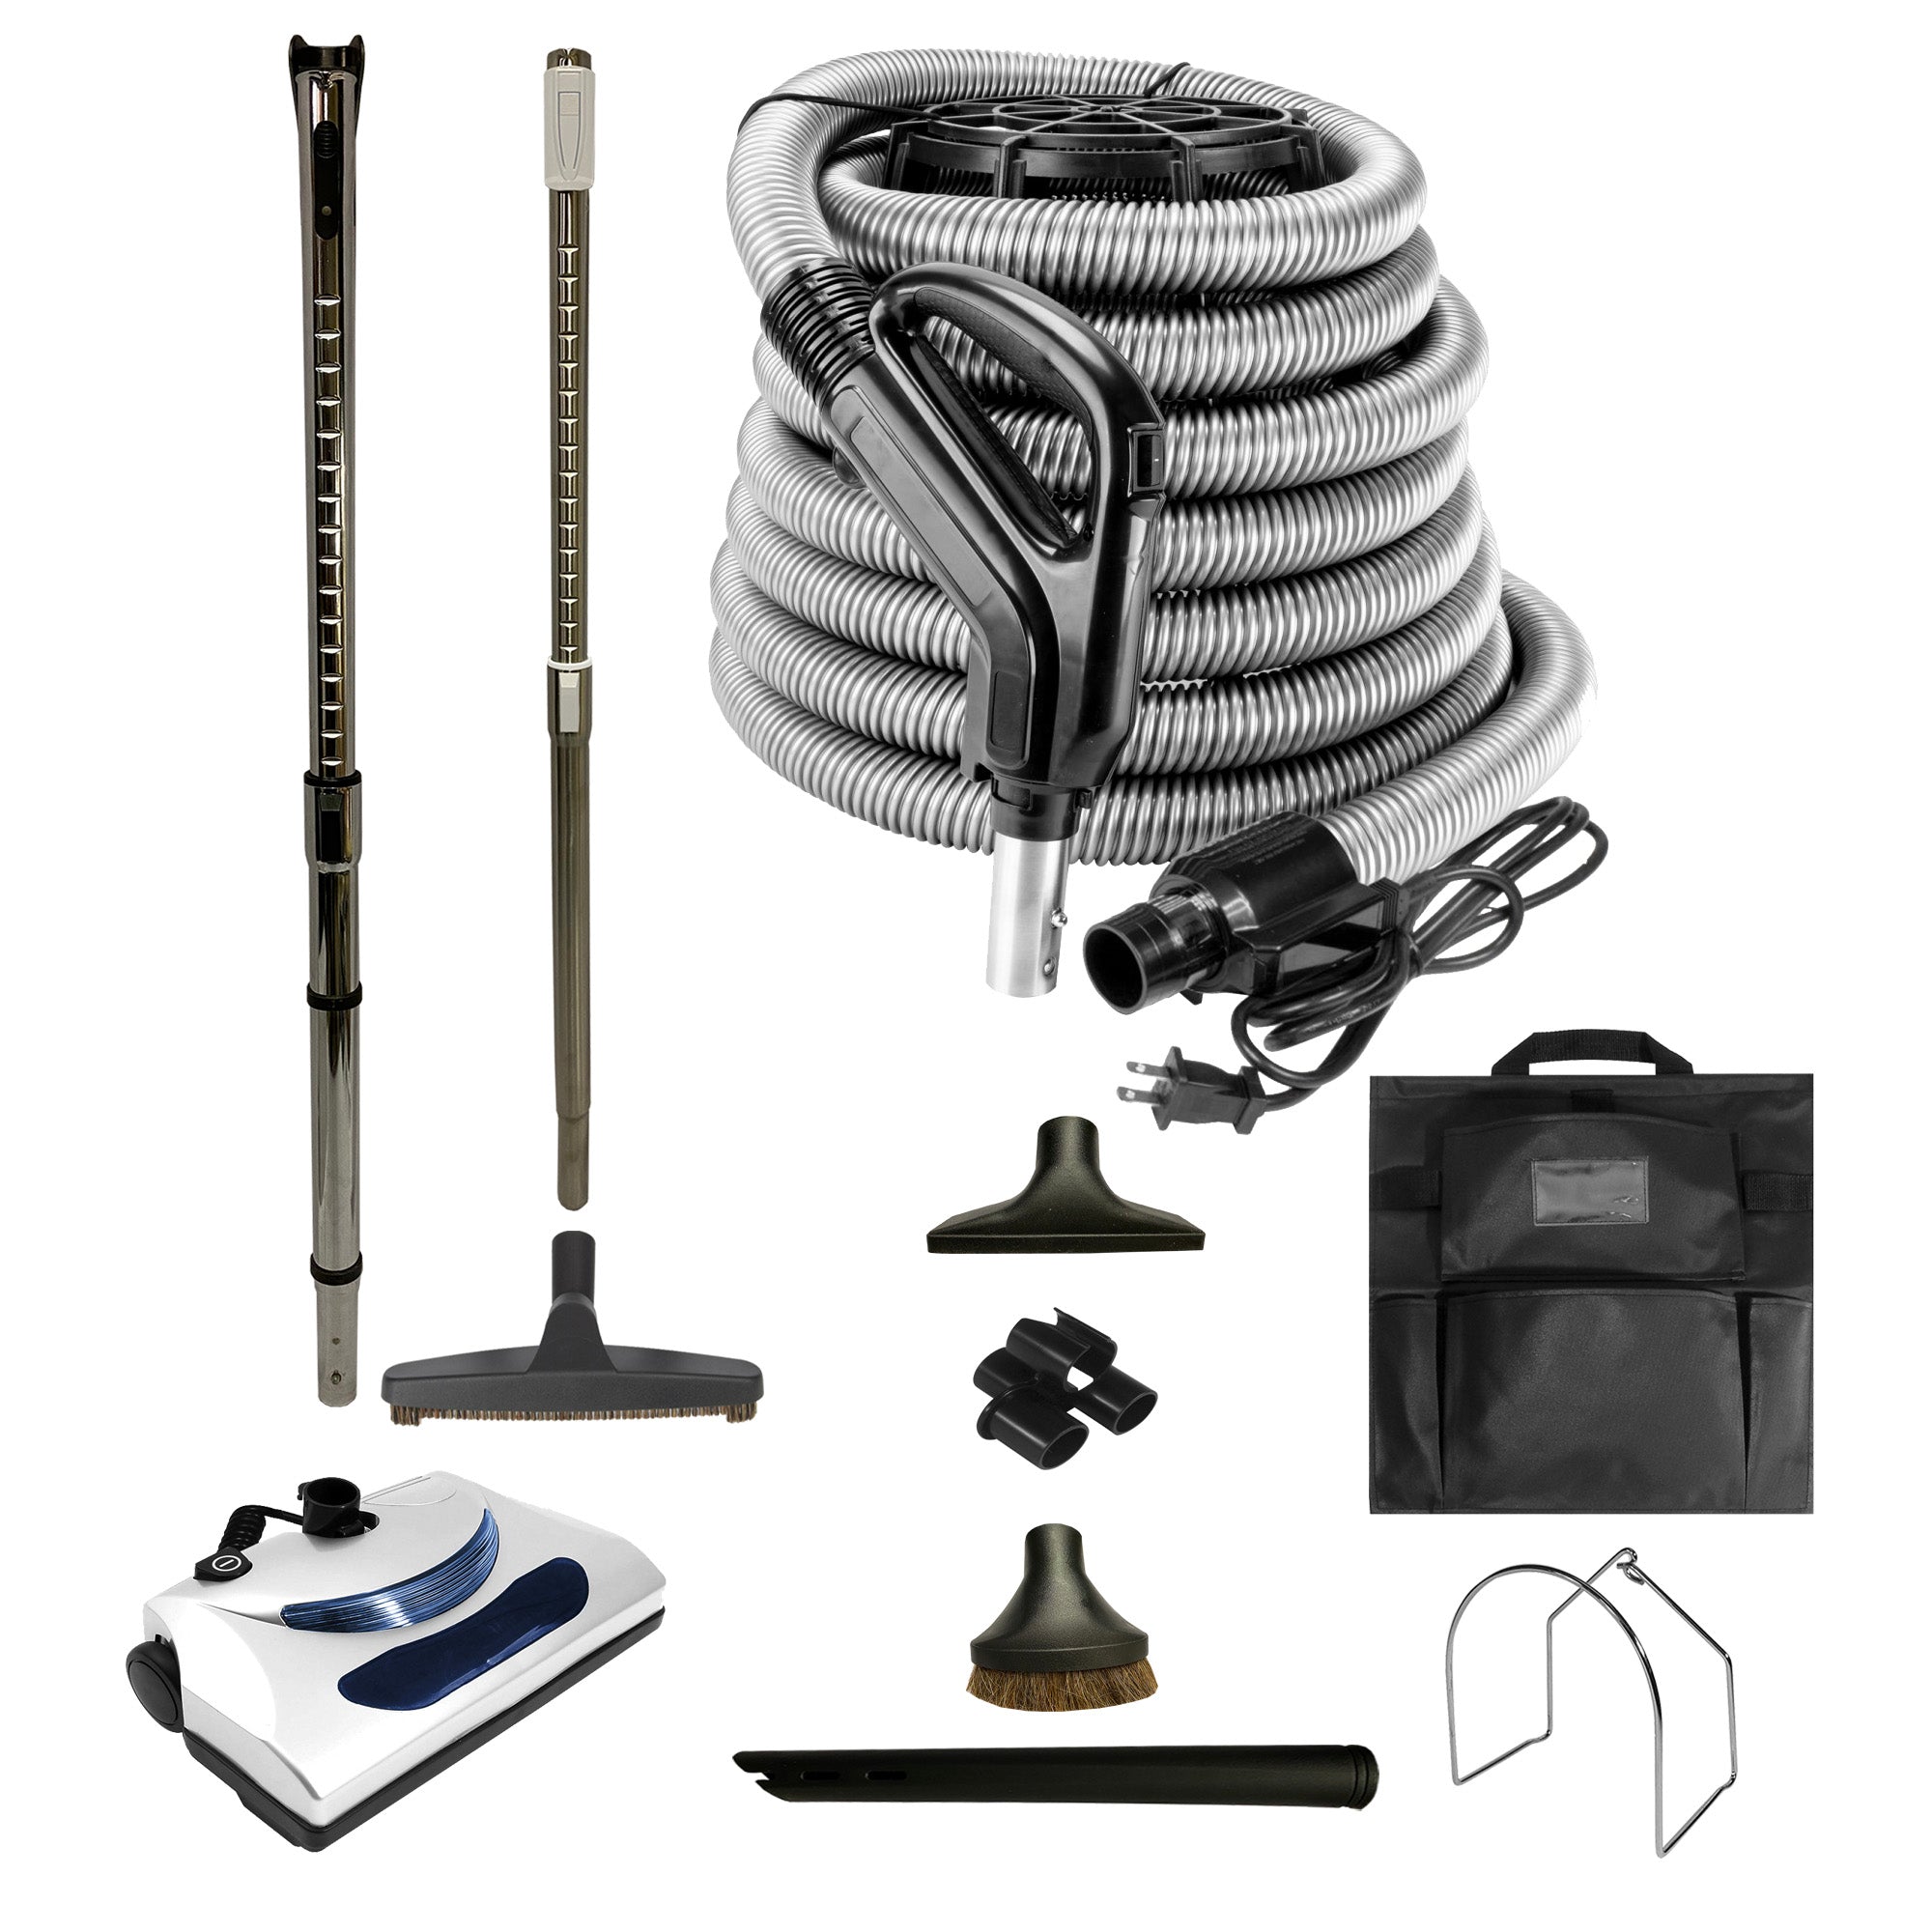 Central Vacuum Accessory Kit with PN11 Powerhead and Deluxe Tools - Black